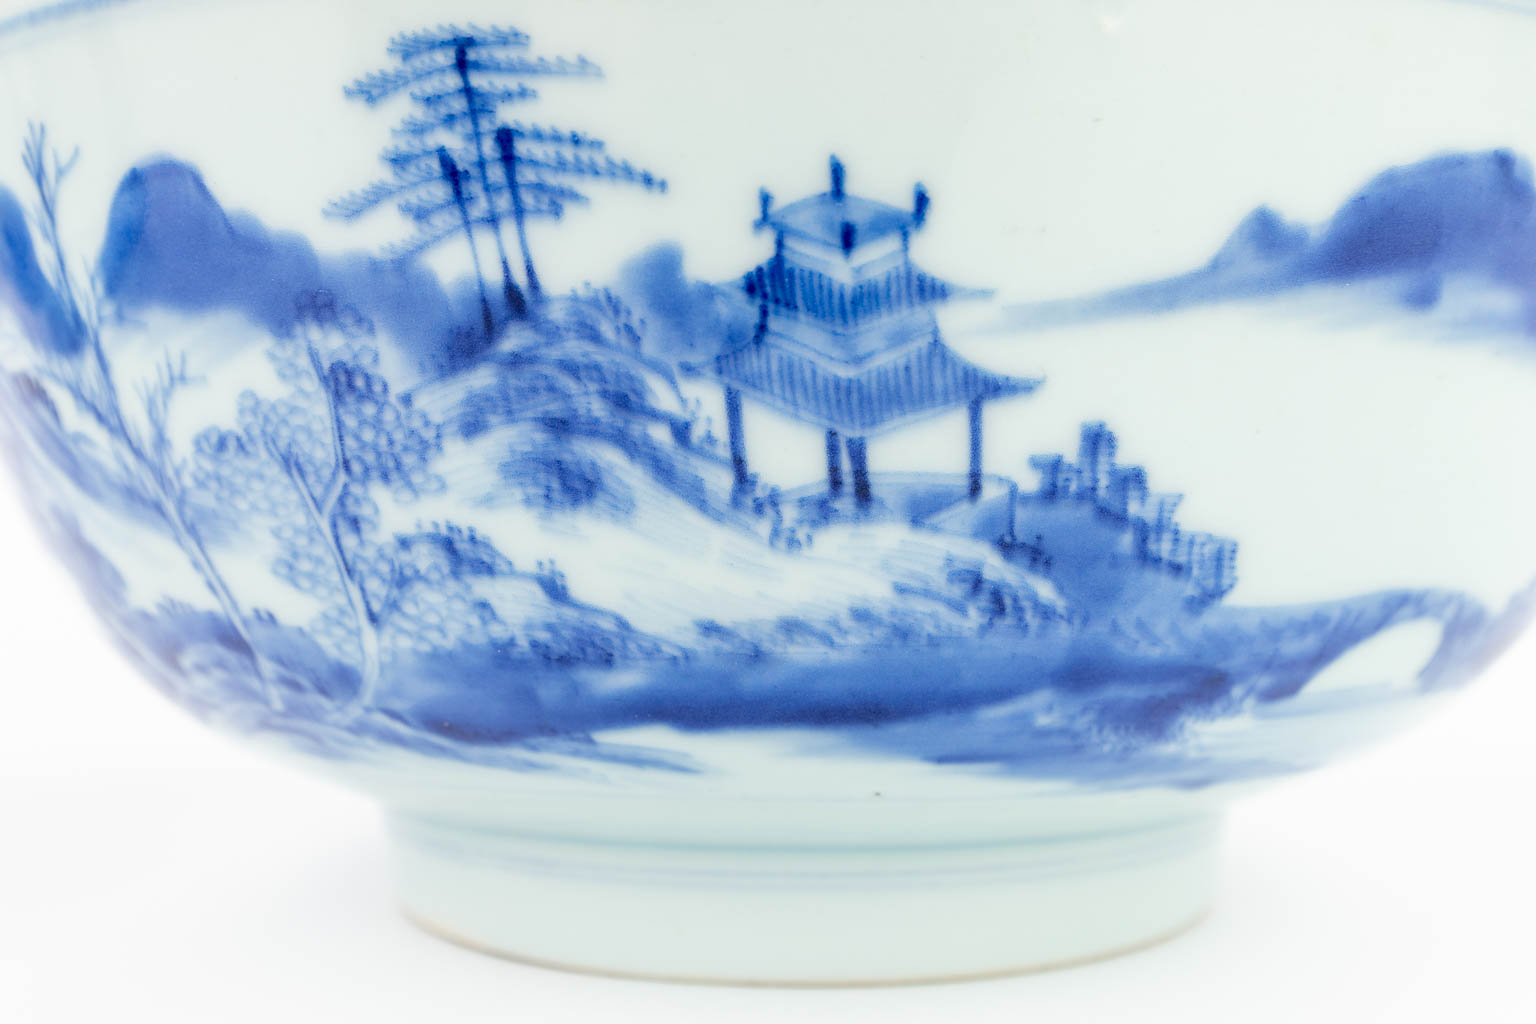 A pair of Chinese bowls made of blue-white porcelain. 18th/19th century. 